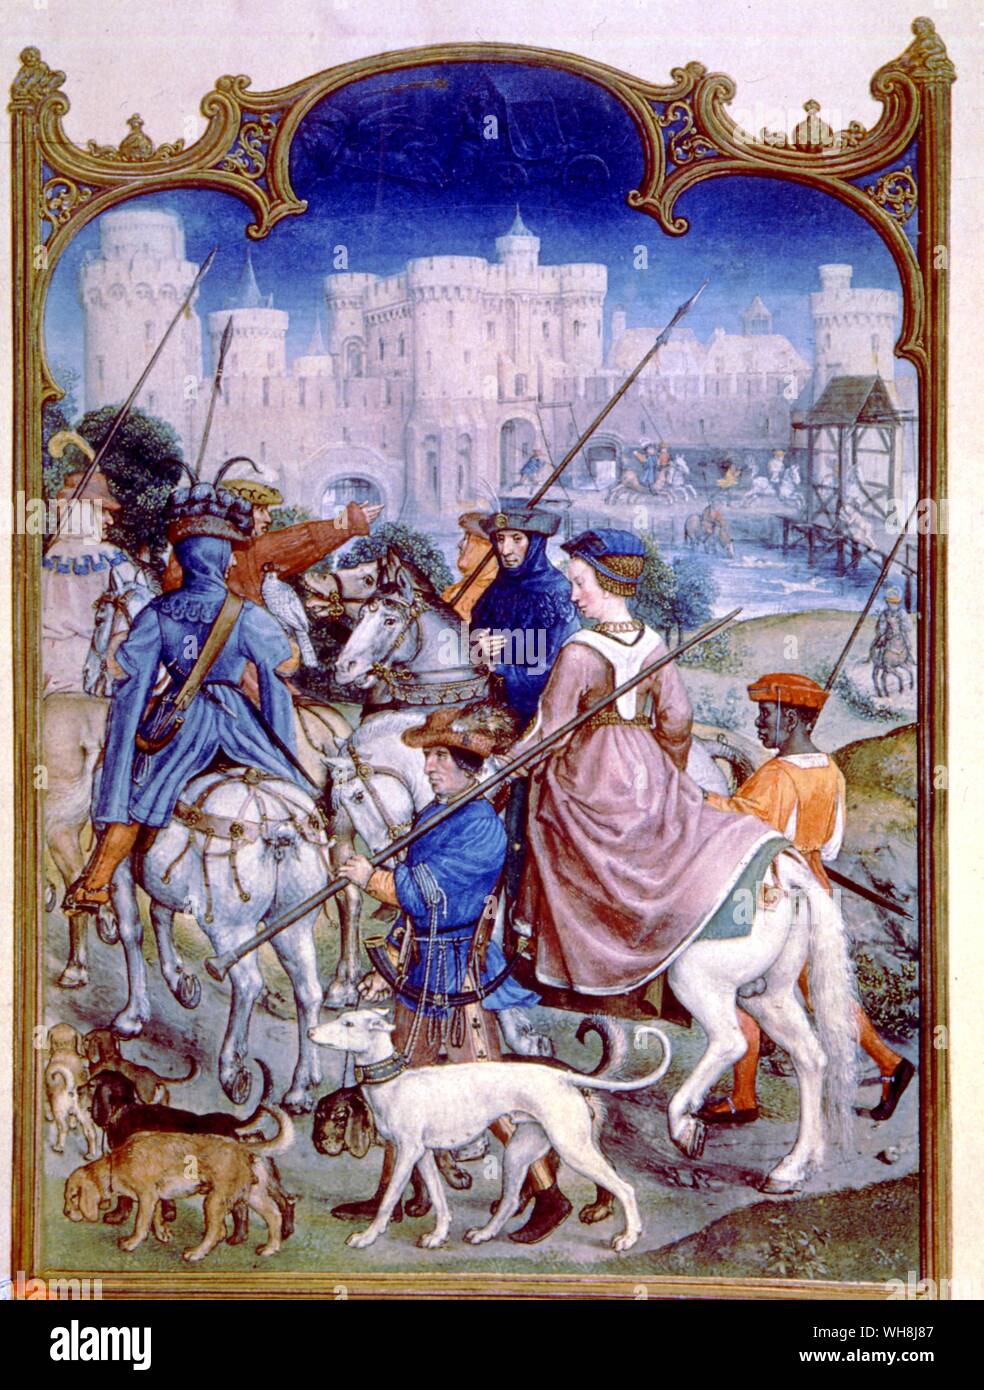 All classes loved hunting, though the poor could not enjoy the sumptuous day long sport of the nobility, and Chaucer hardly idealizes it as he does virtuous poverty Stock Photo